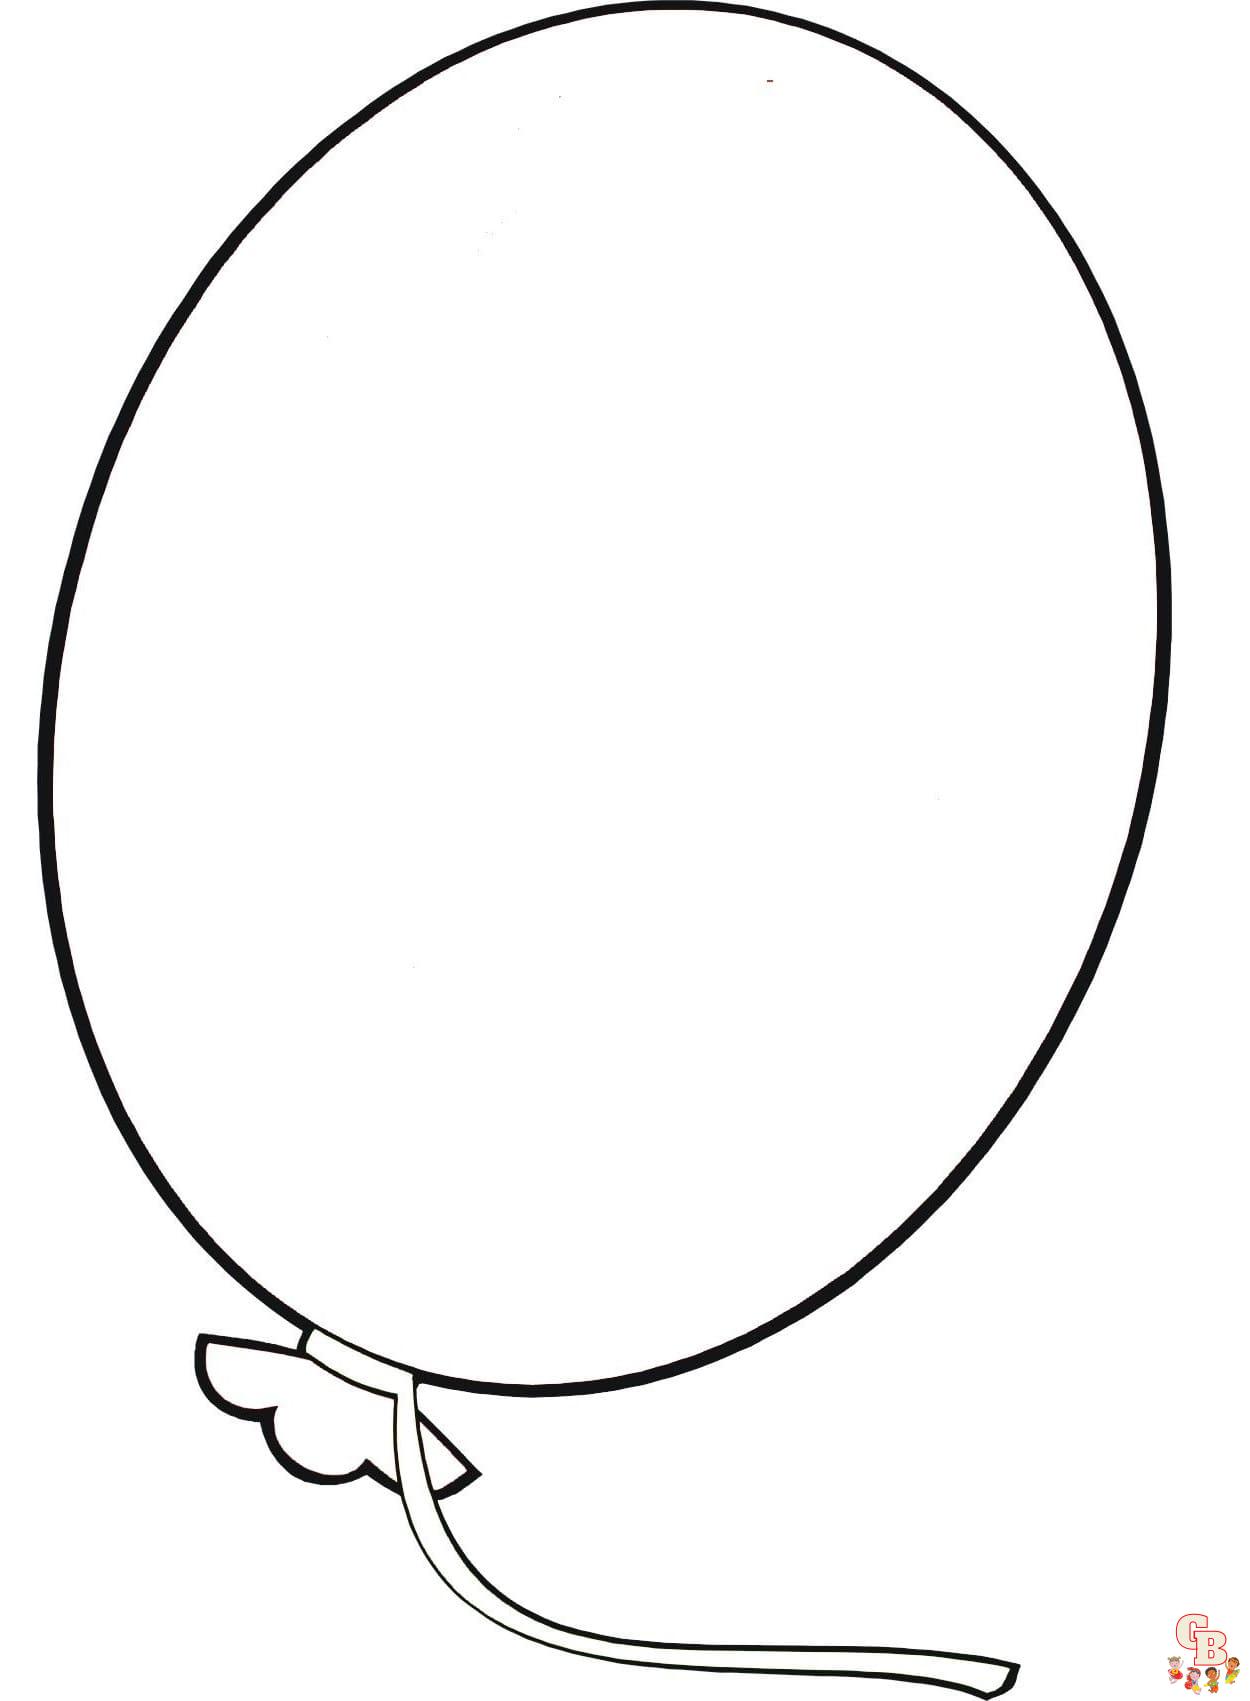 Oval coloring pages printable free